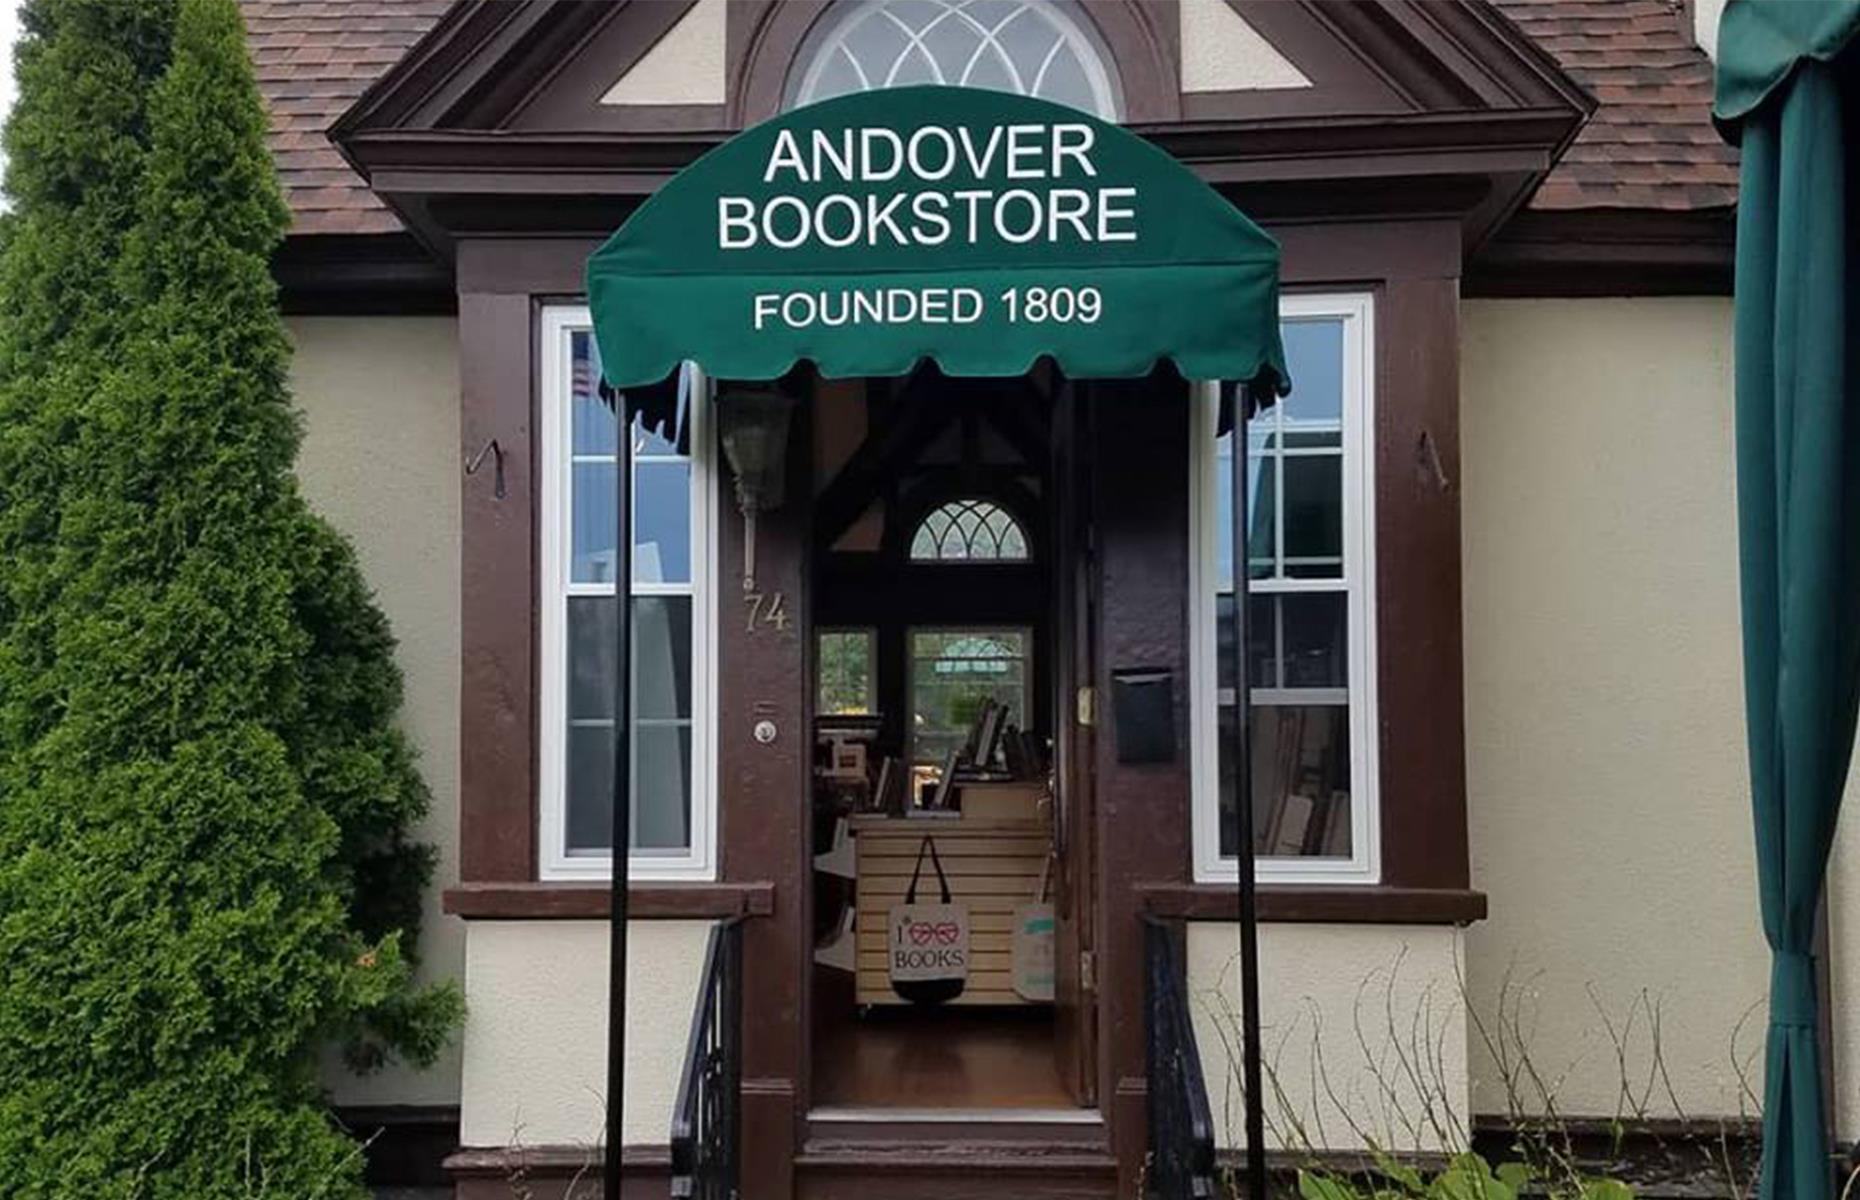 Now: Andover Bookstore